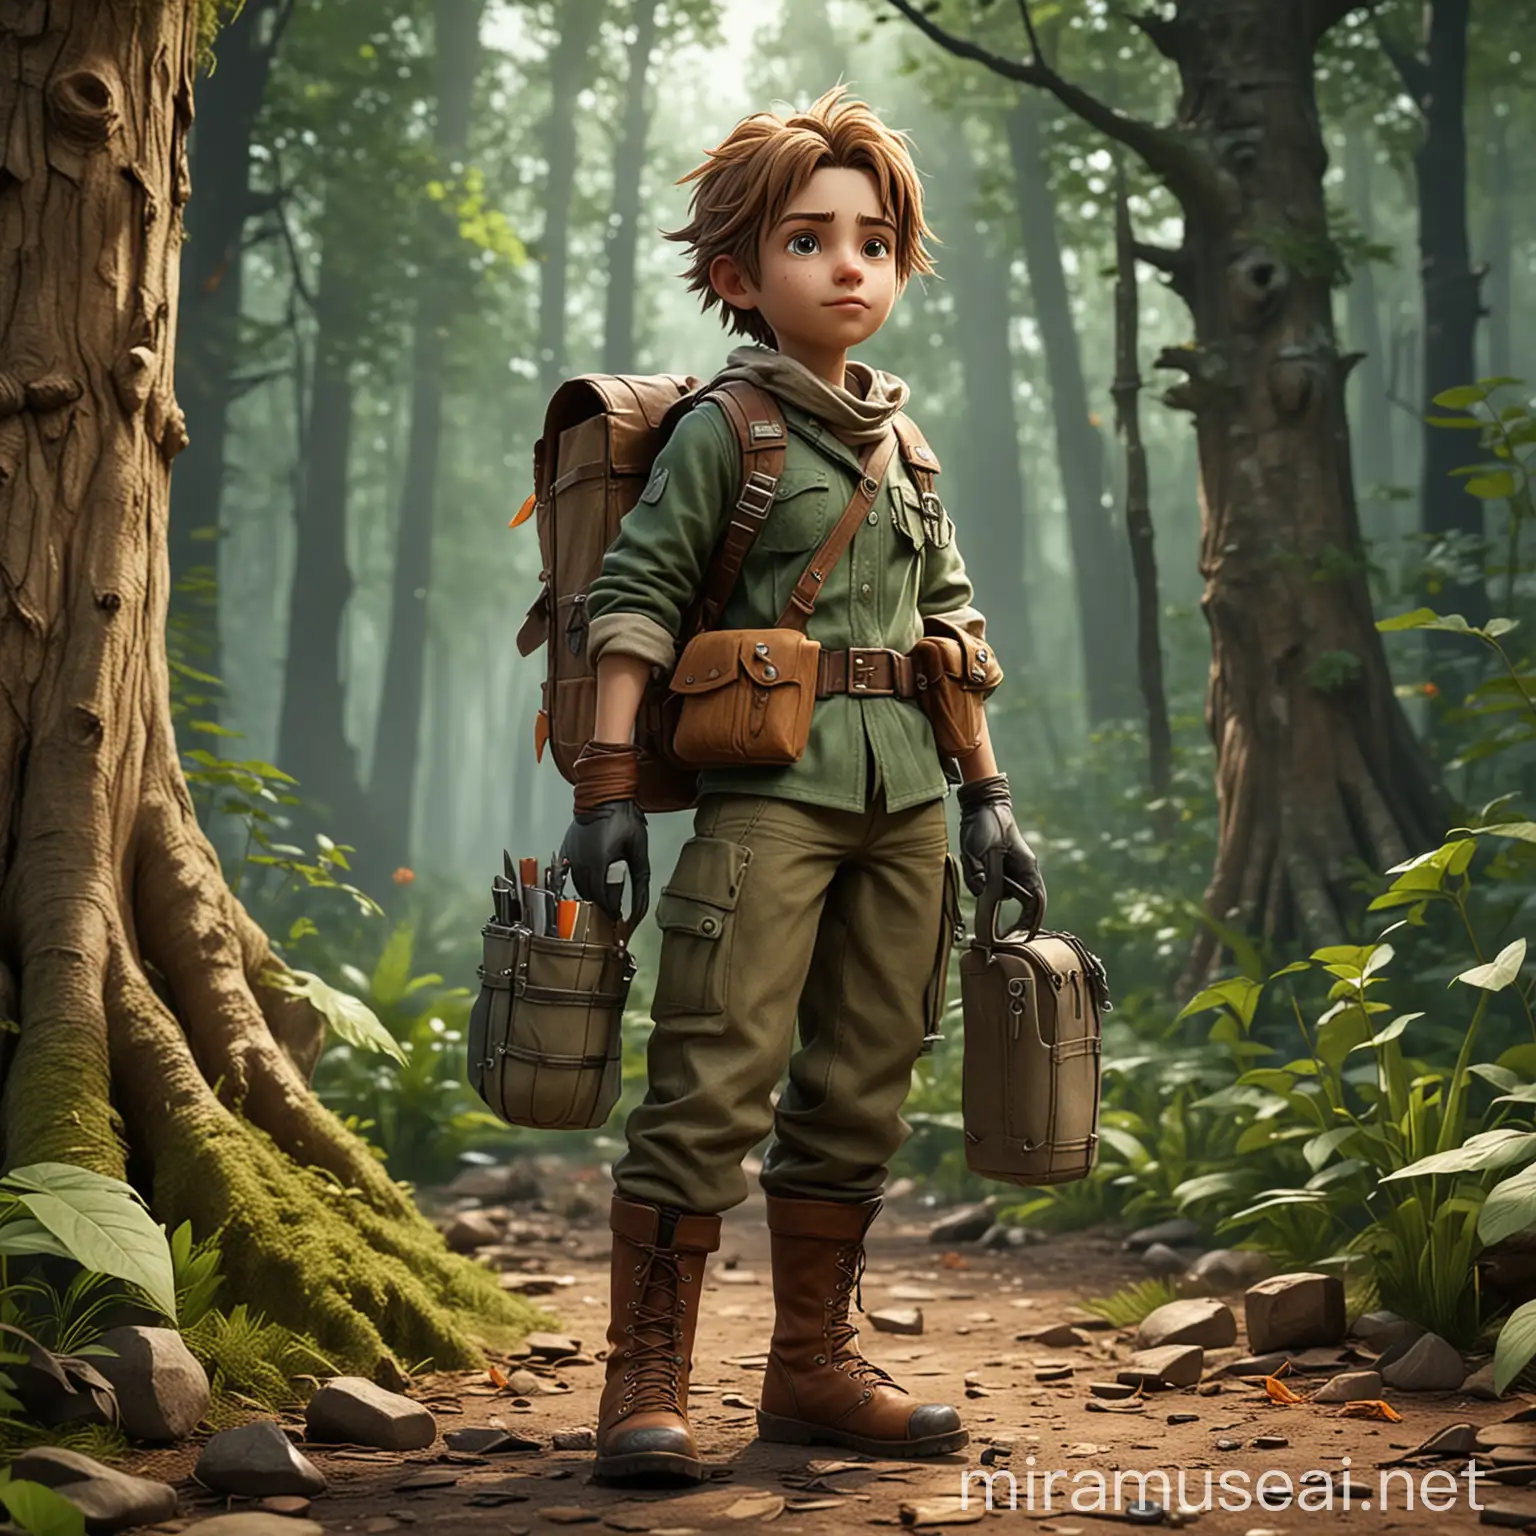 Determined Young EcoWarrior with Magic Amulet in Forest Adventure